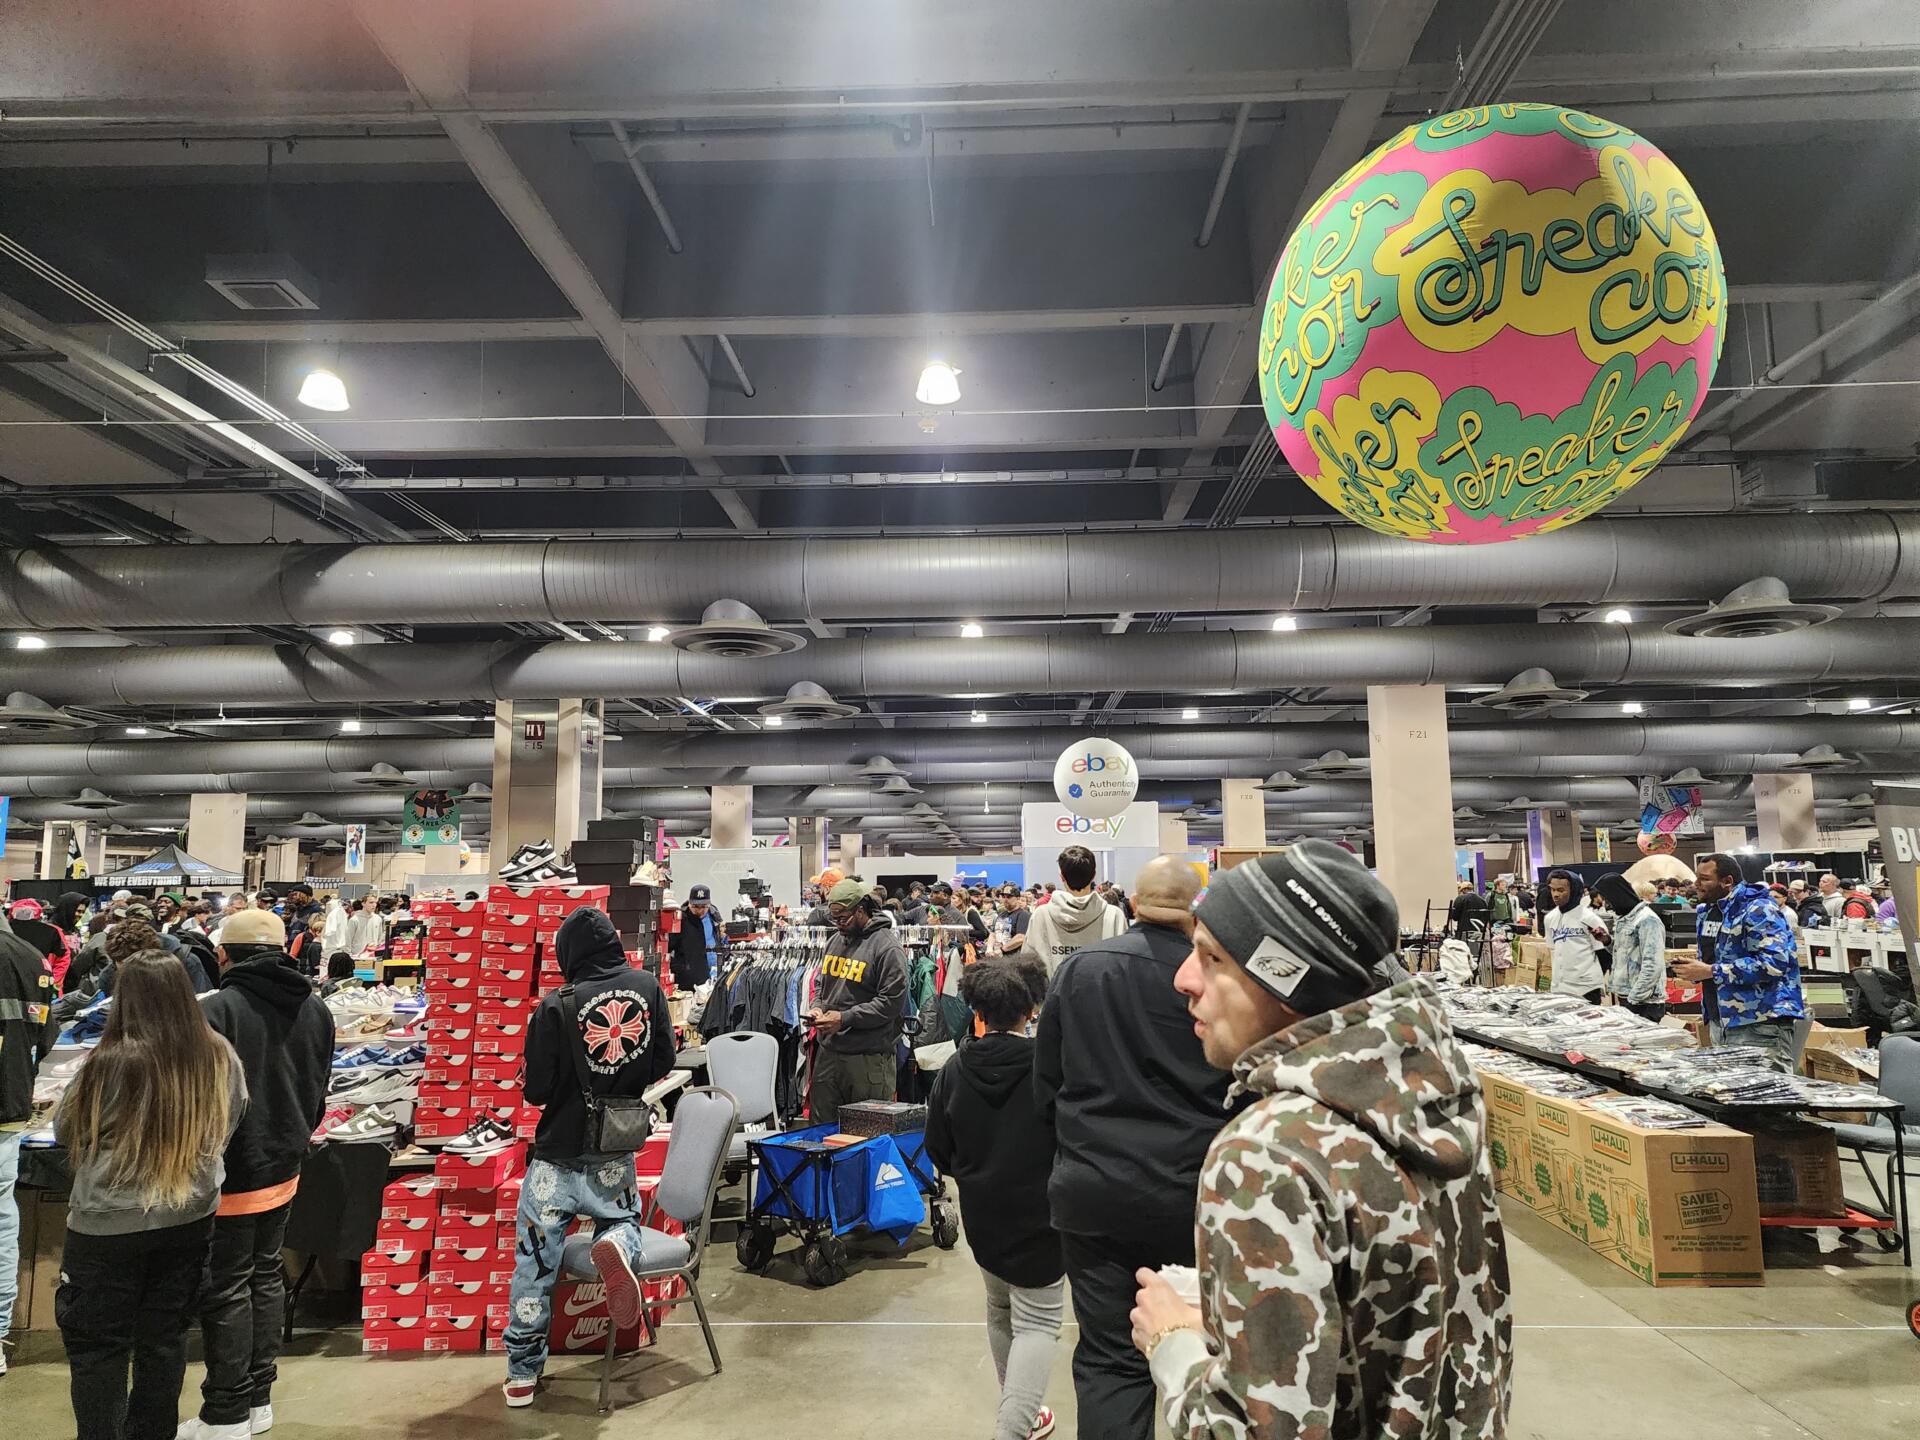 The Best, Rarest Sneakers and Stuff Found at Sneaker Con, "The Greatest Sneaker Show On Earth